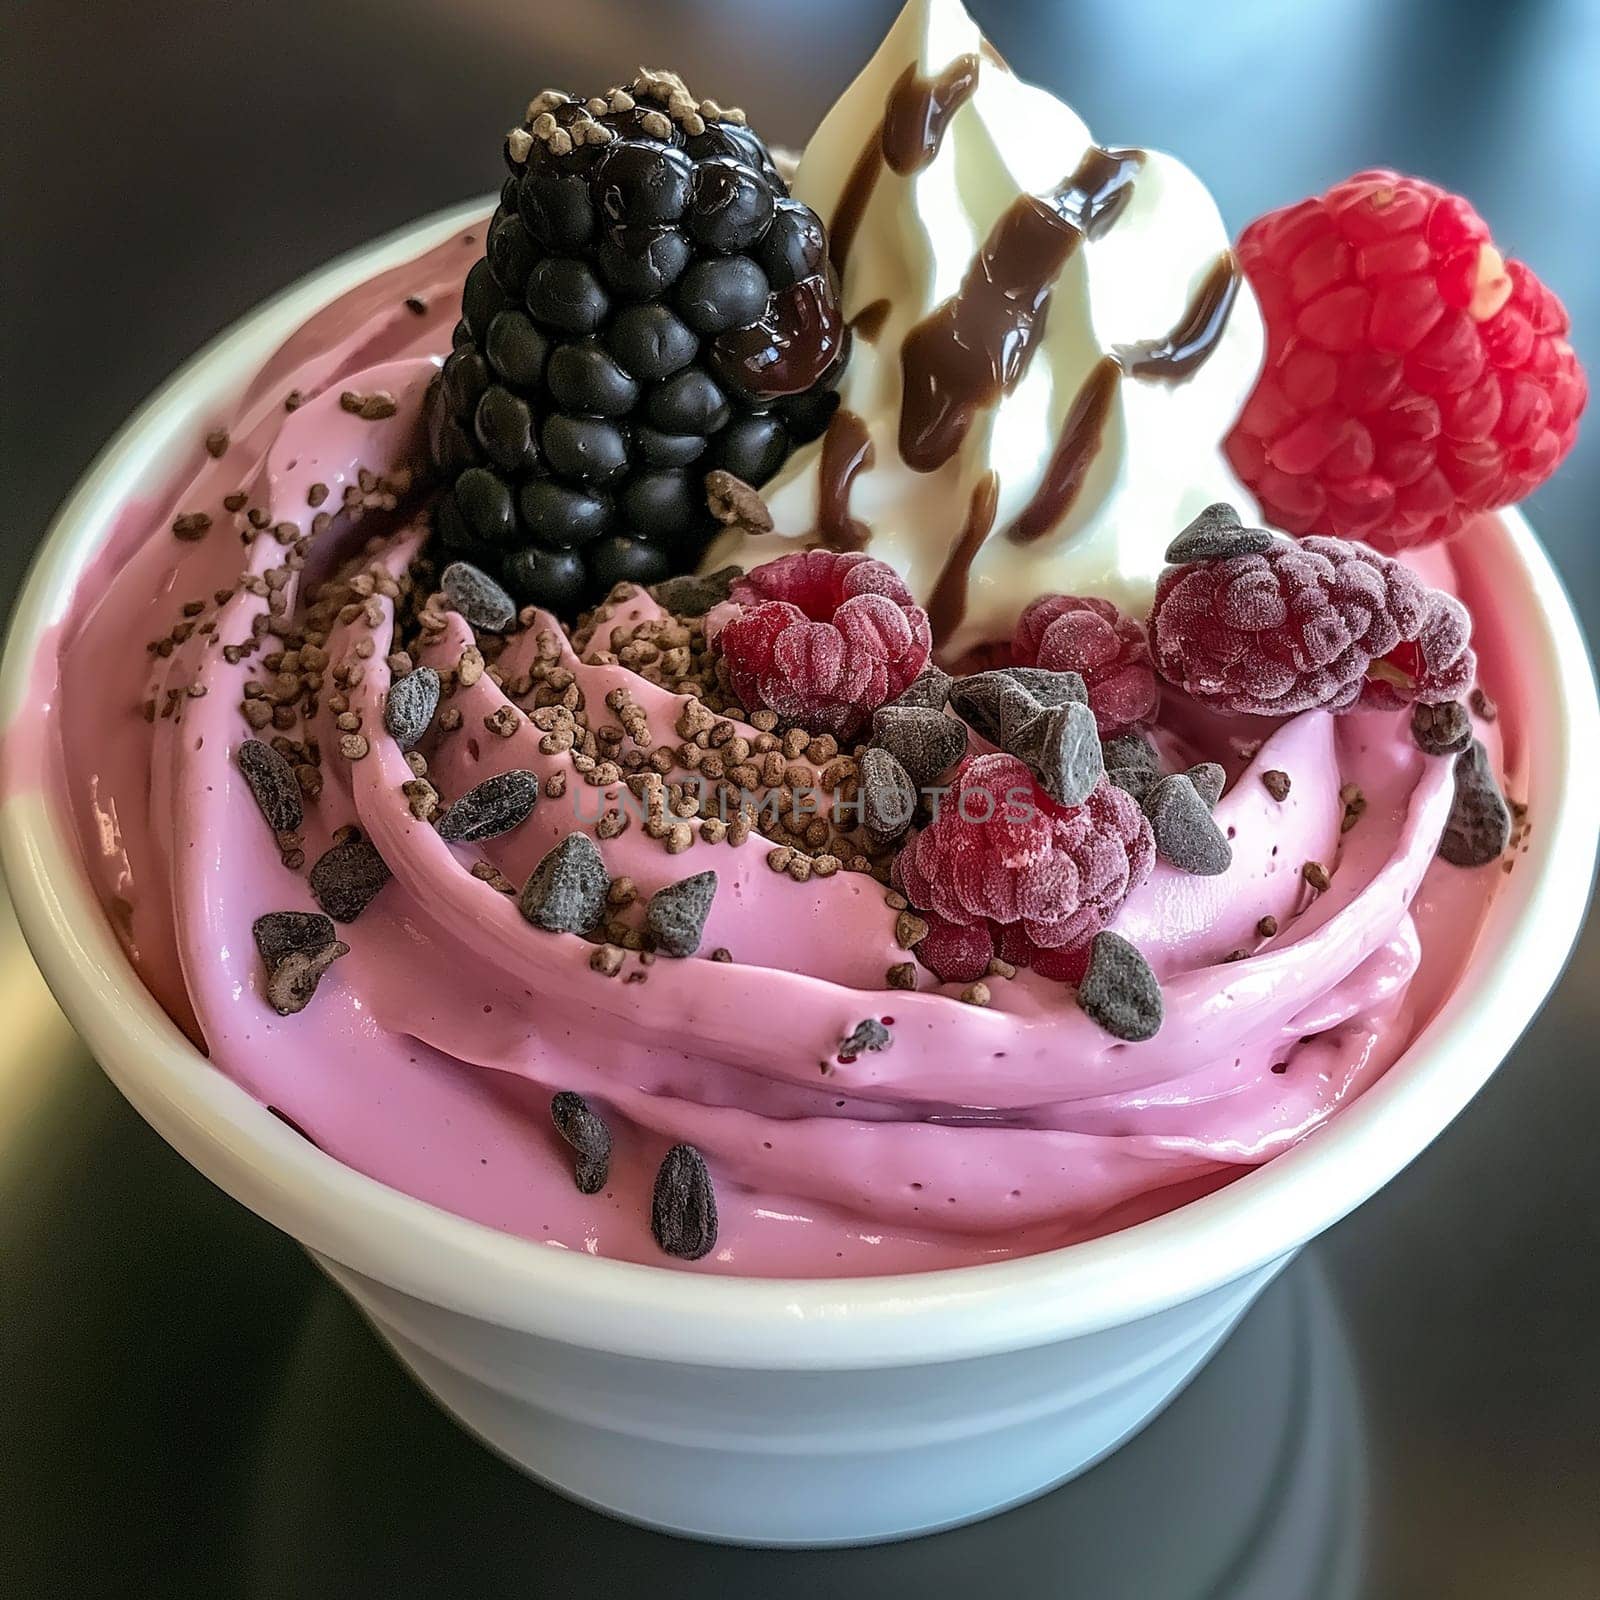 Velvety pink frozen yogurt topped with berries and chocolate bits. by Hype2art